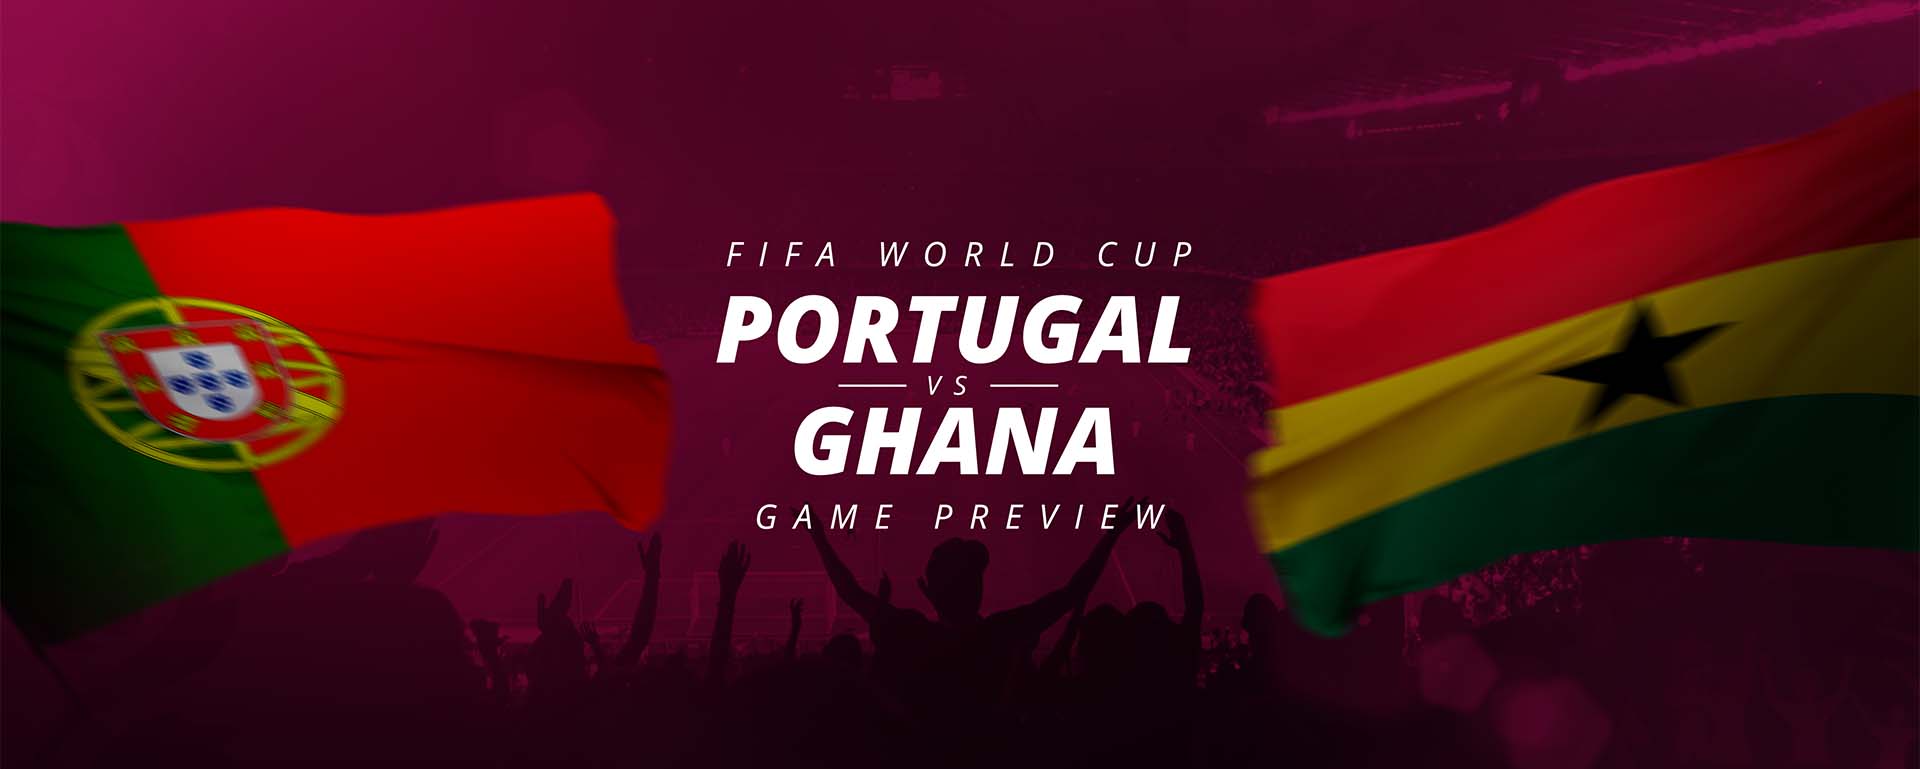 FIFA WORLD CUP: PORTUGAL V GHANA – GAME PREVIEW